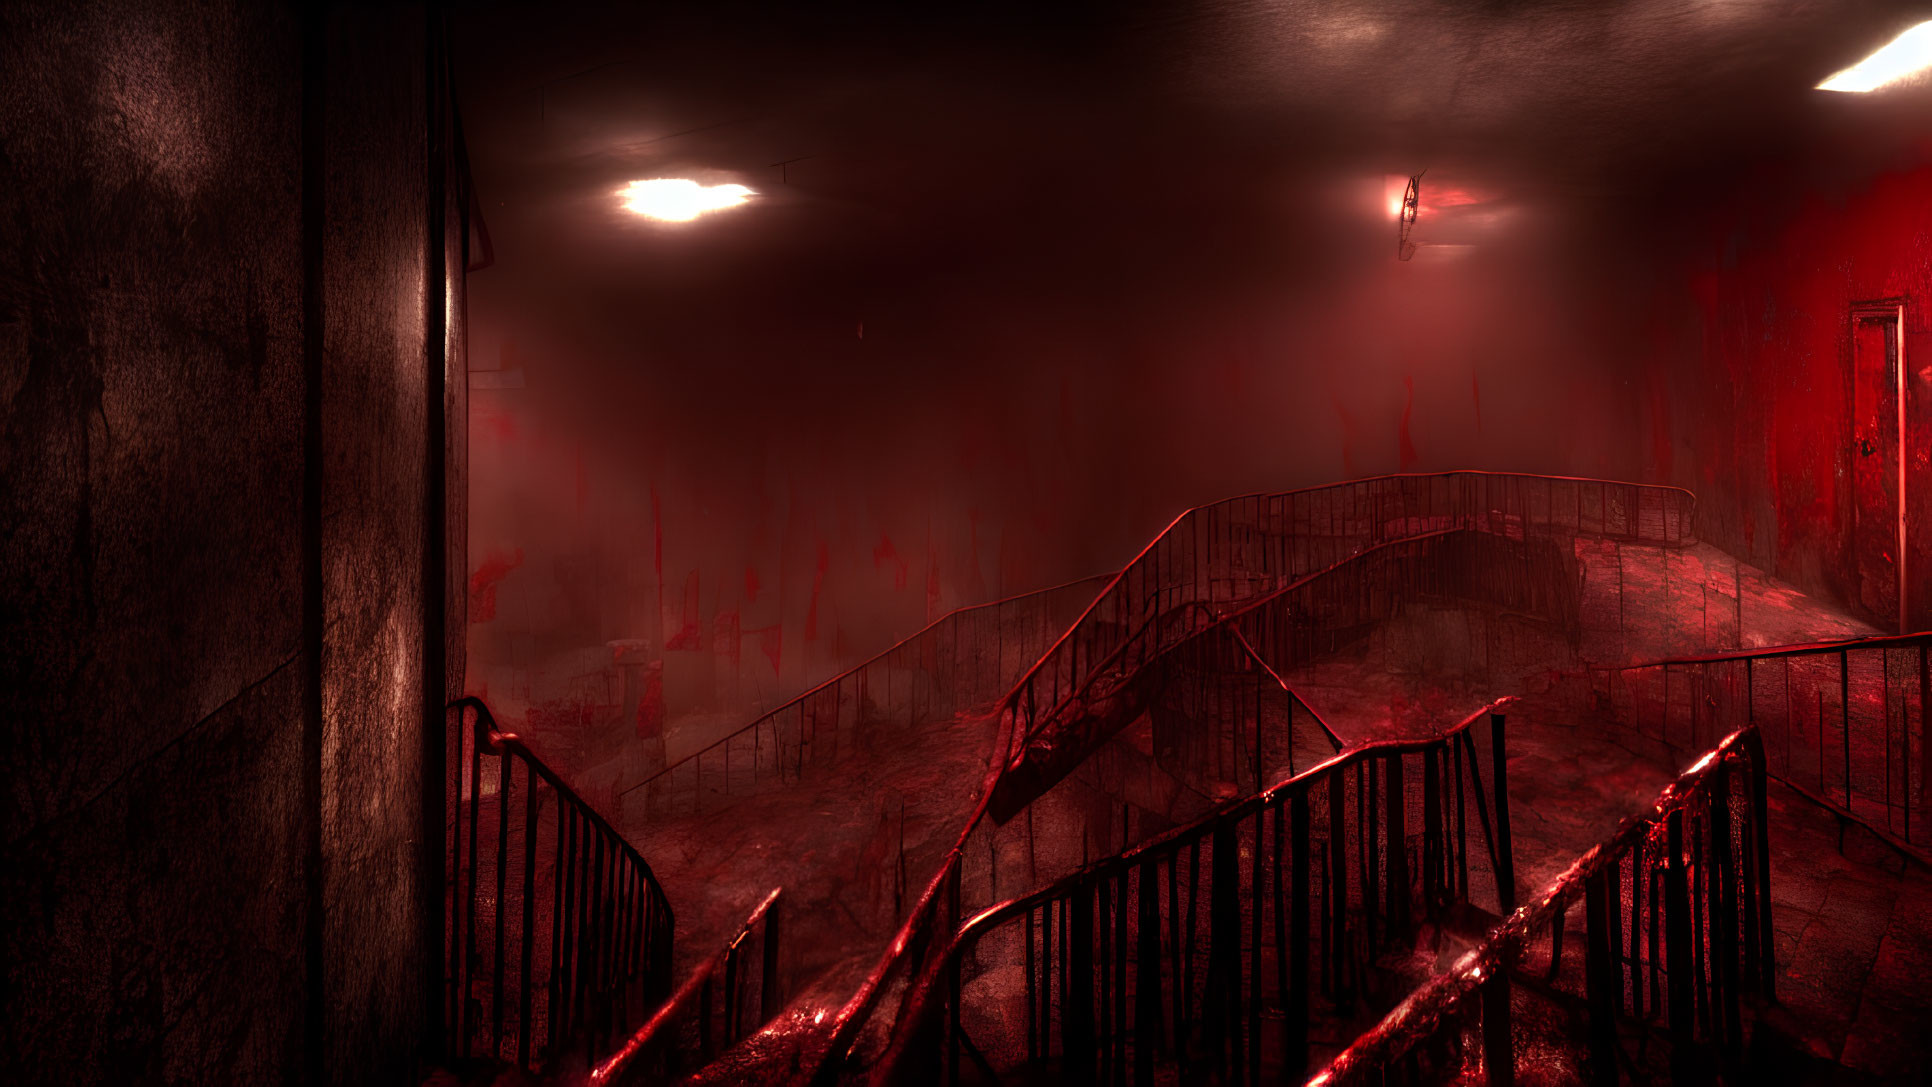 Red-walled staircase with industrial lighting and sinister vibe